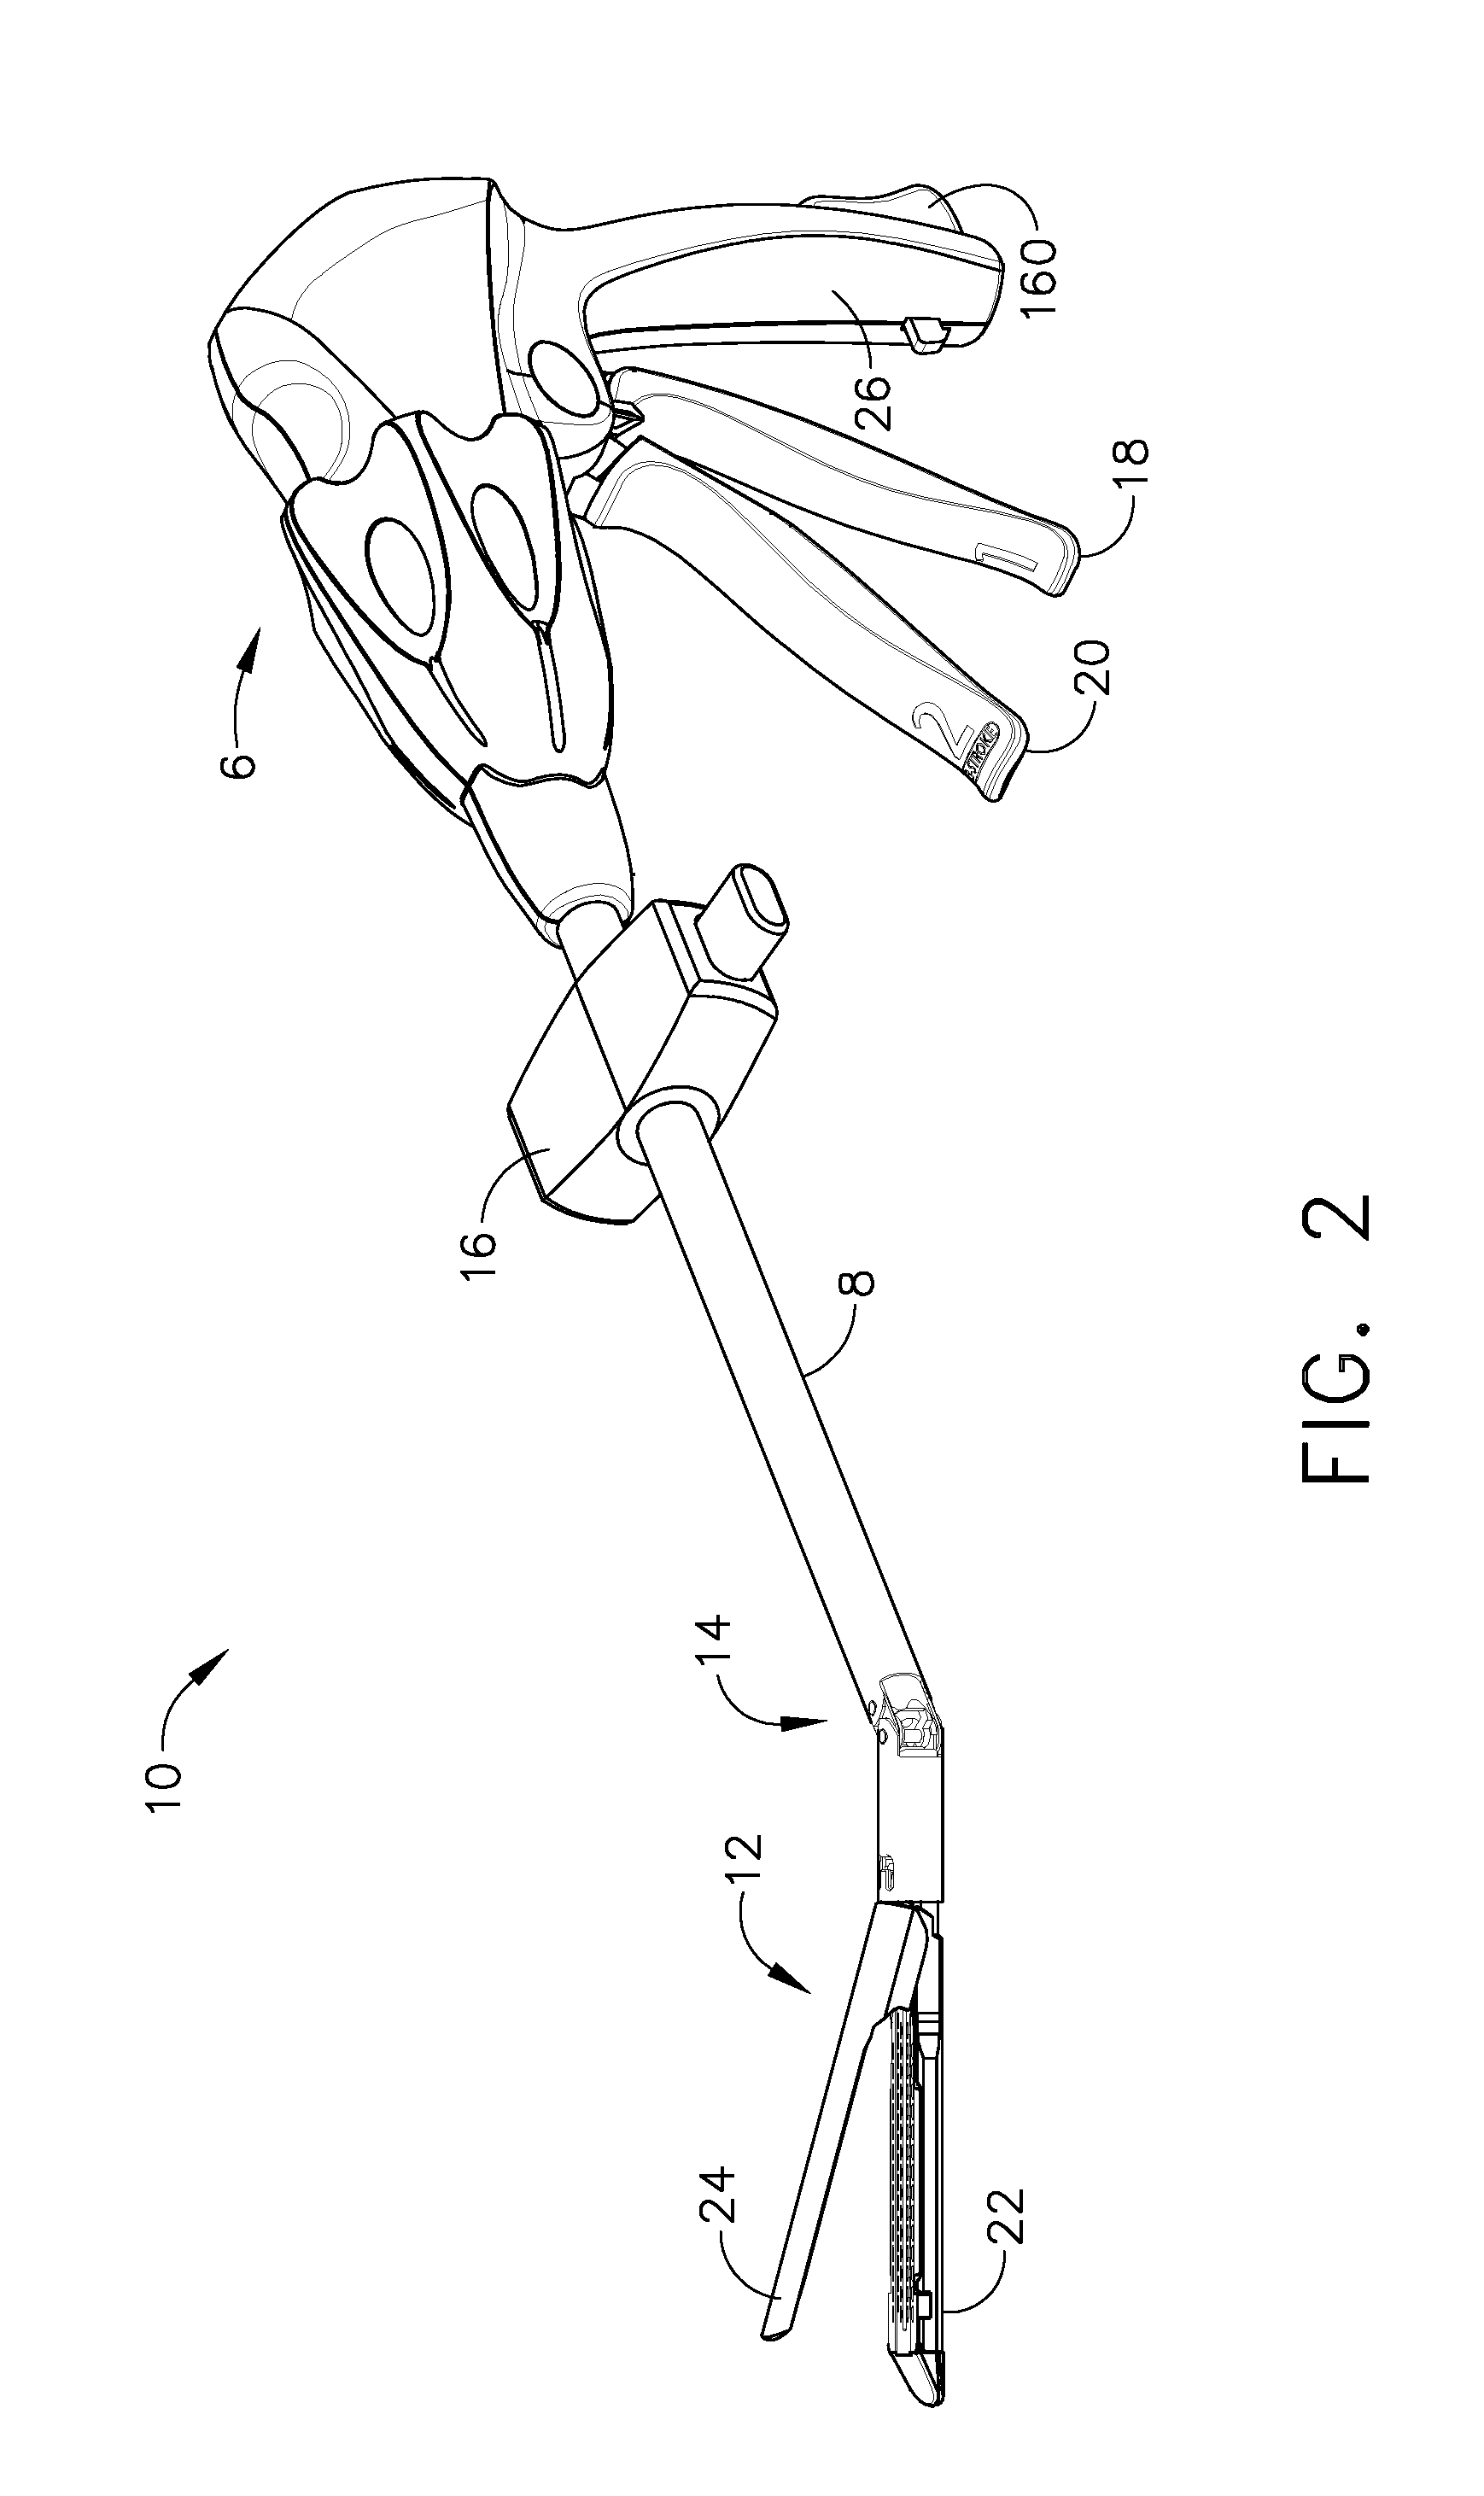 Powered surgical cutting and stapling apparatus with manually retractable firing system